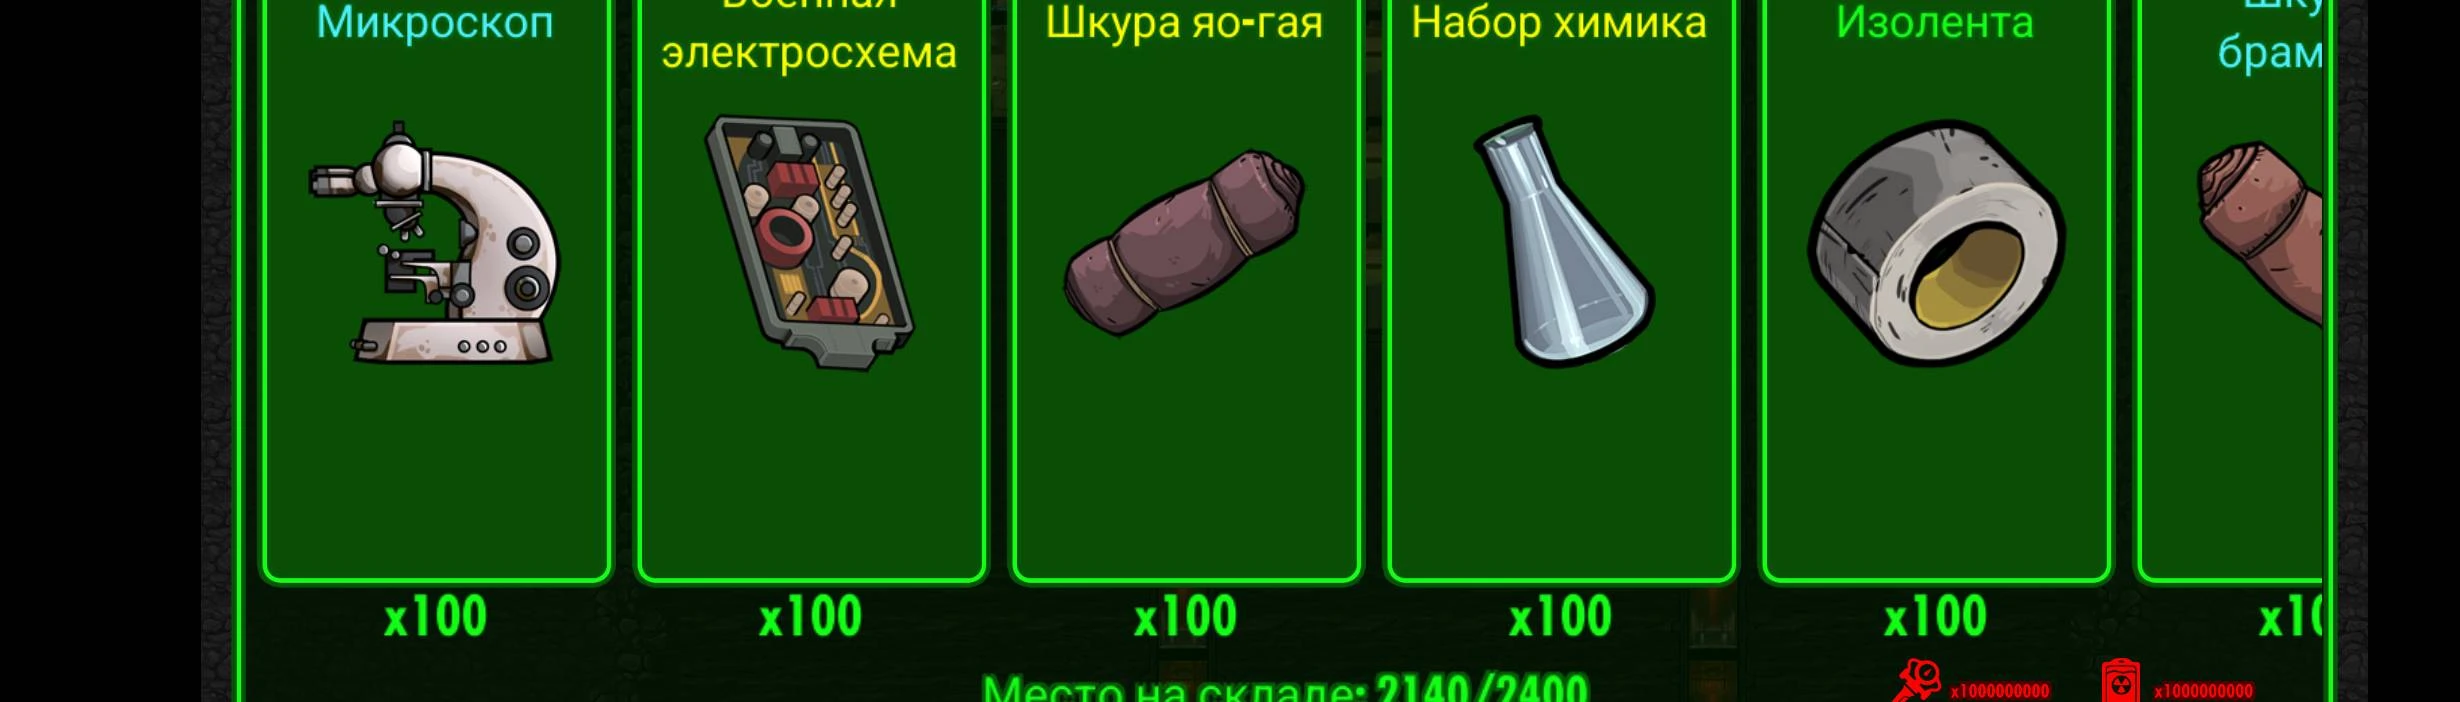 News] Free items for the day : r/falloutshelter